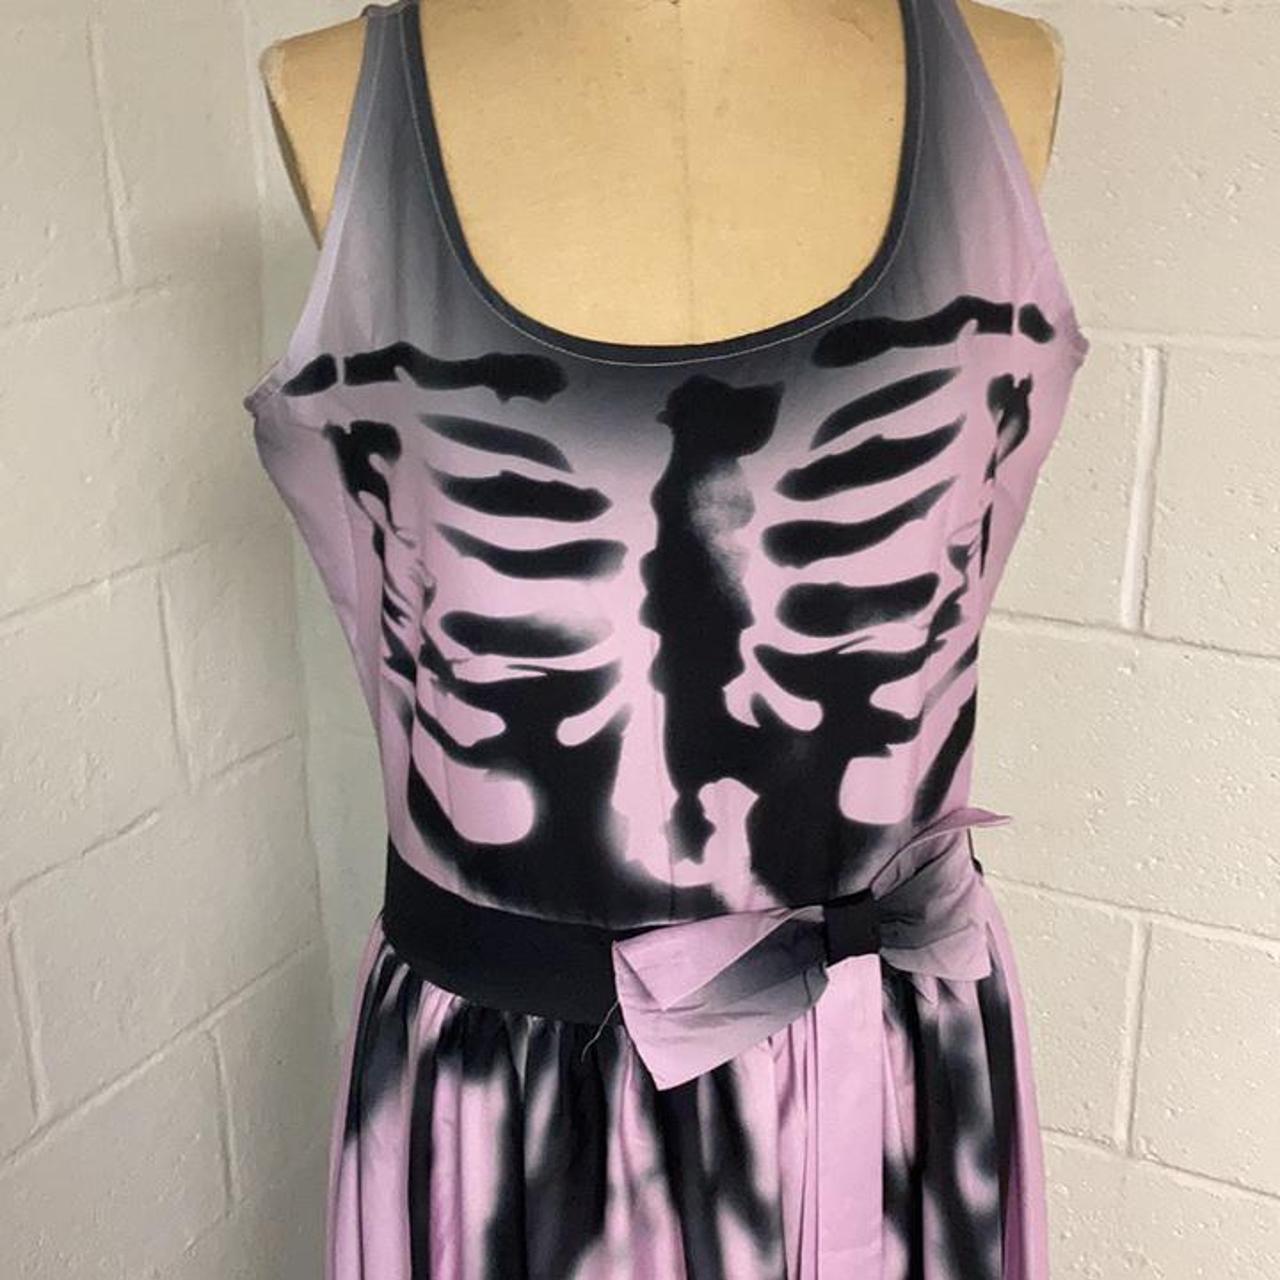 Women's Black and Pink Dress (2)